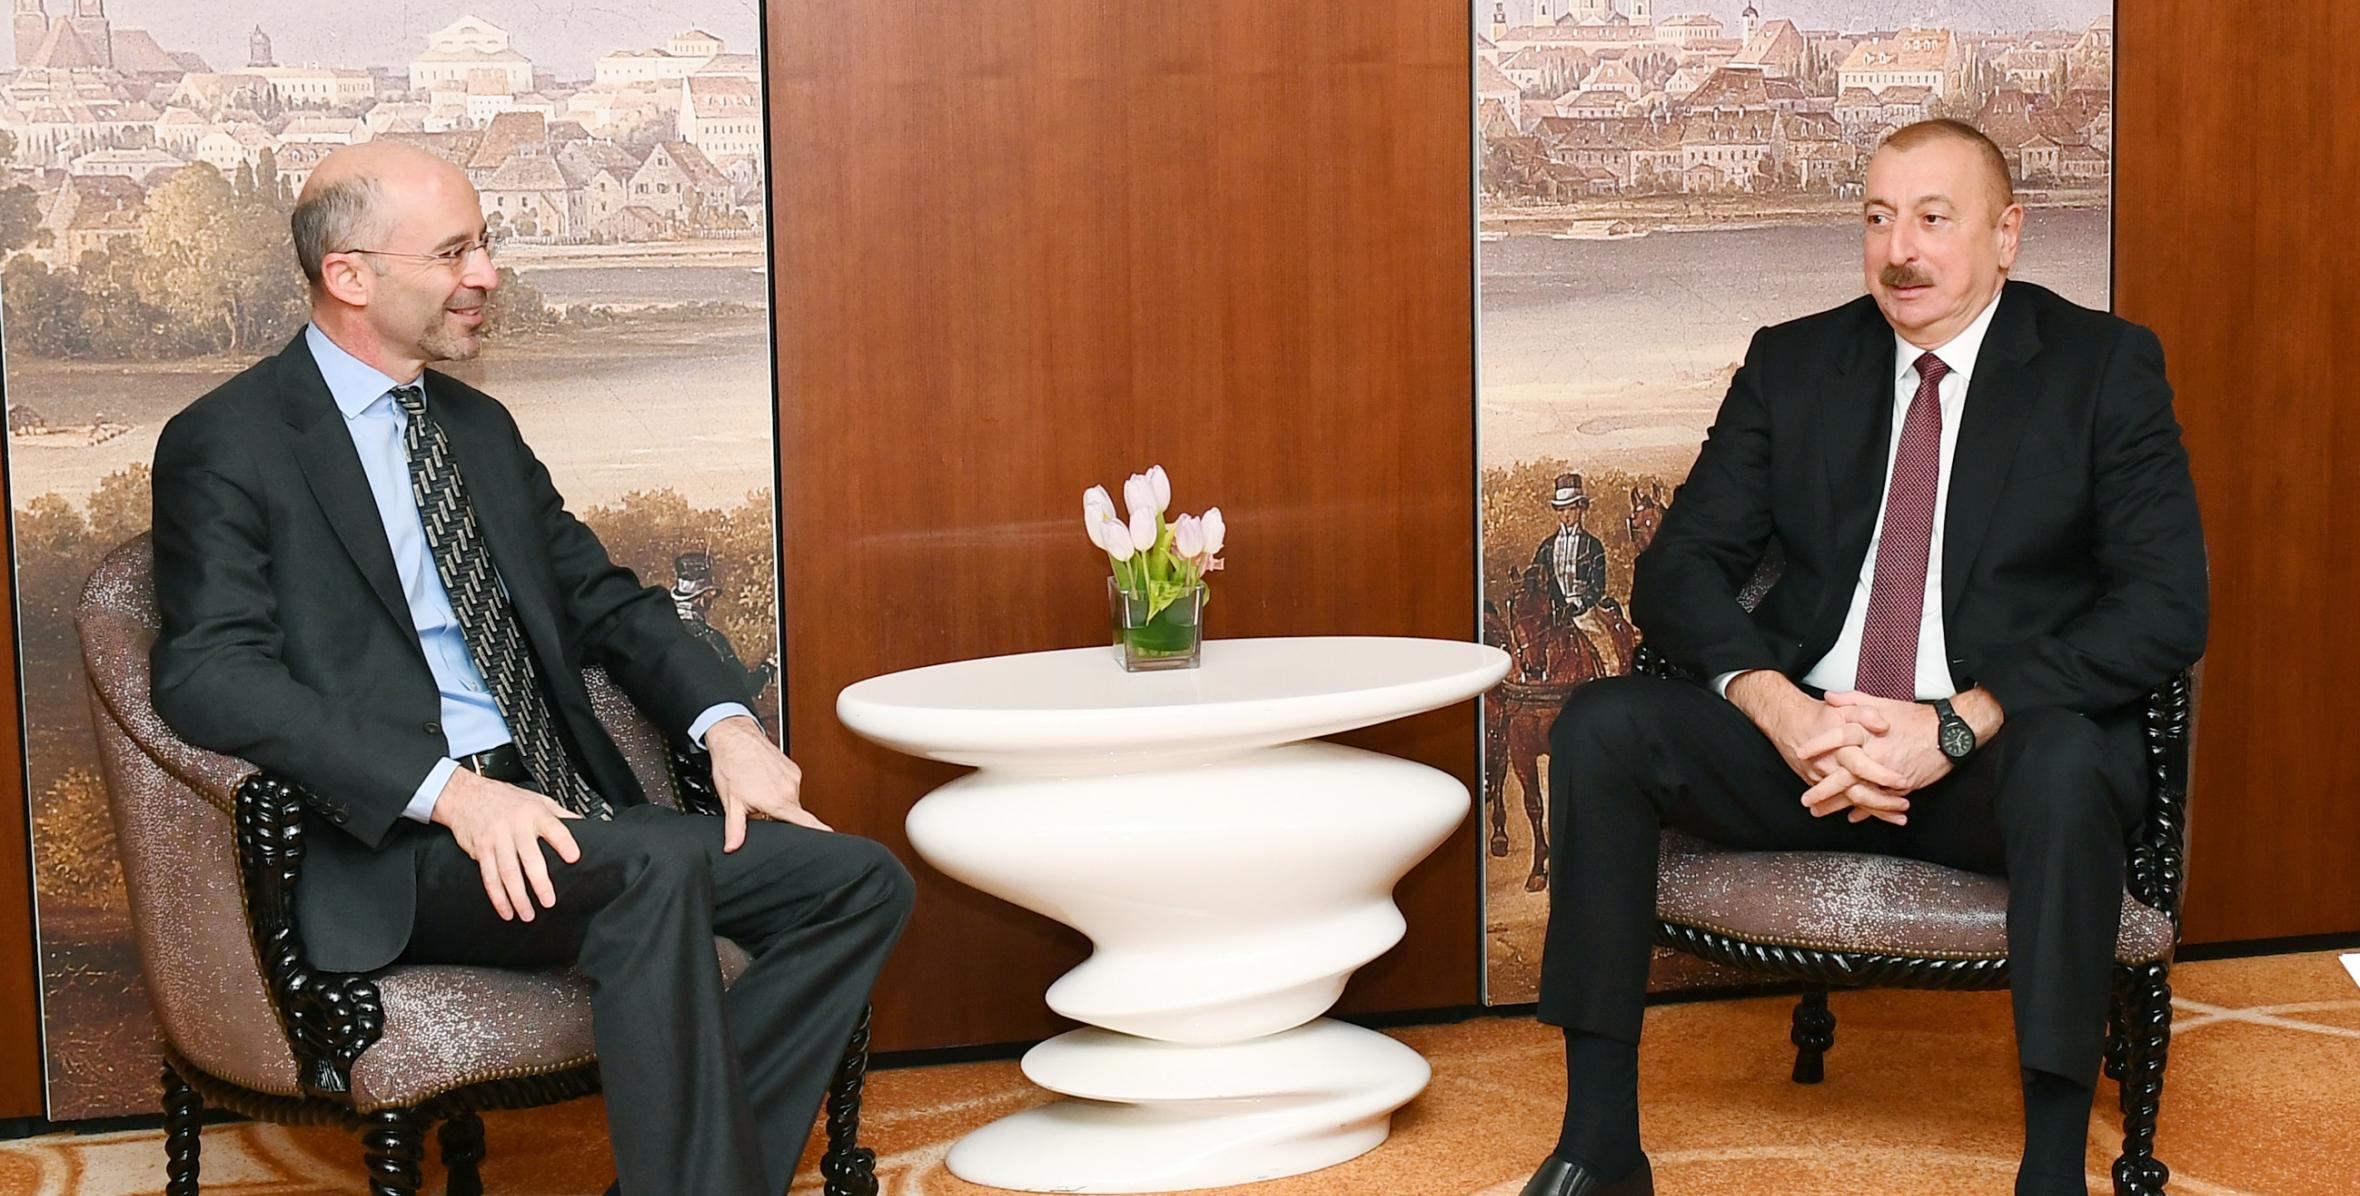 Ilham Aliyev met with president and CEO of International Crisis Group in Munich